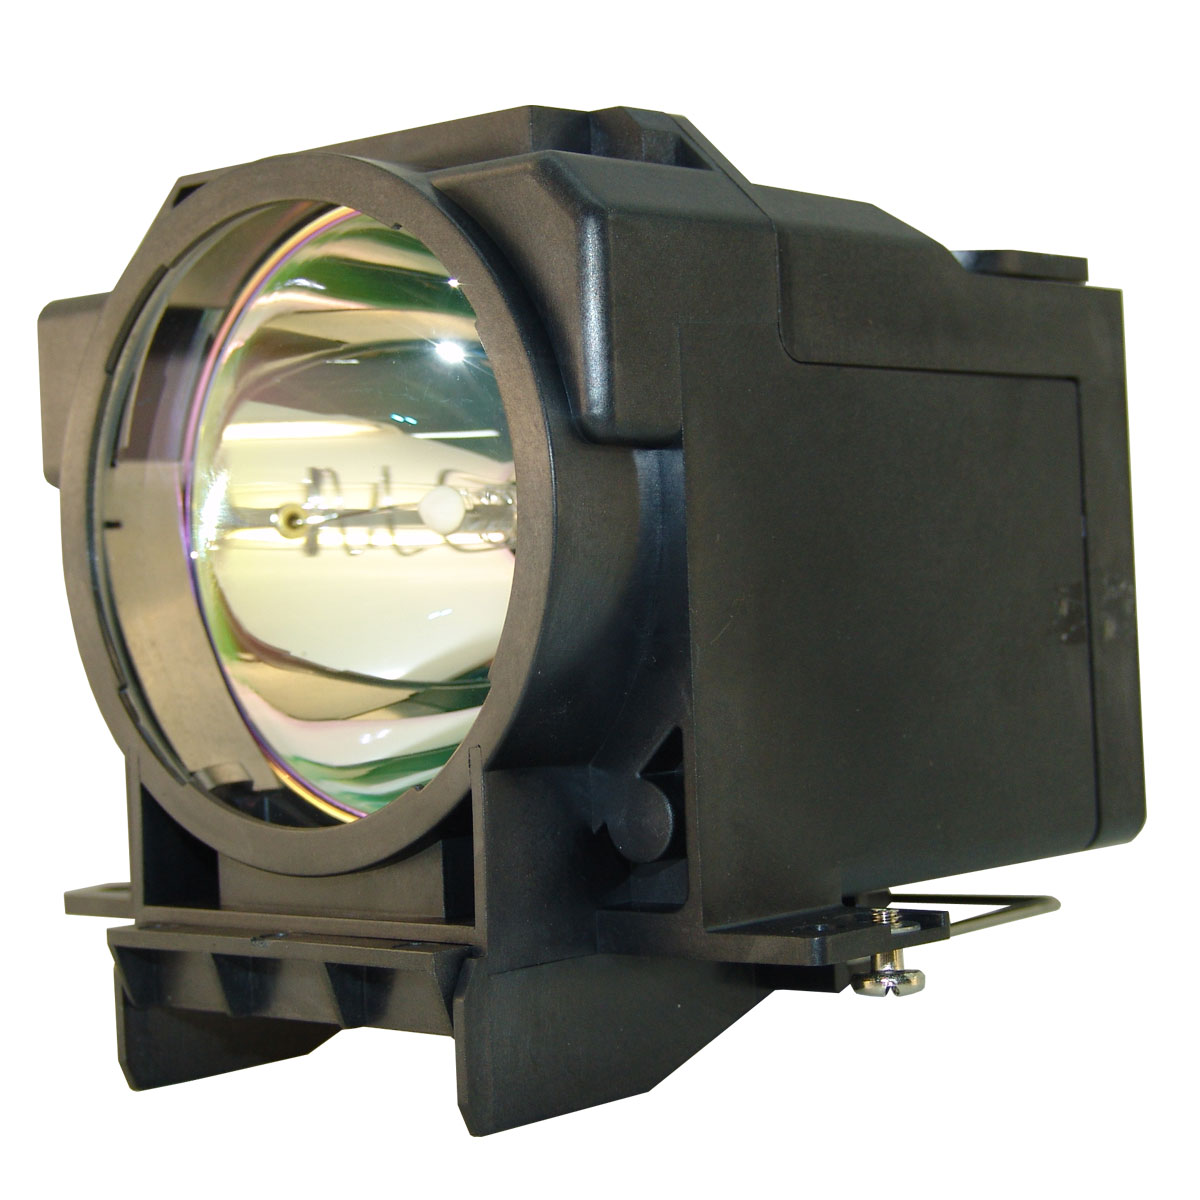 Buyquest EMP 8300NL  OEM Replacement Projector Lamp for Epson. Includes New Ushio UHE 320W Bulb and Housing